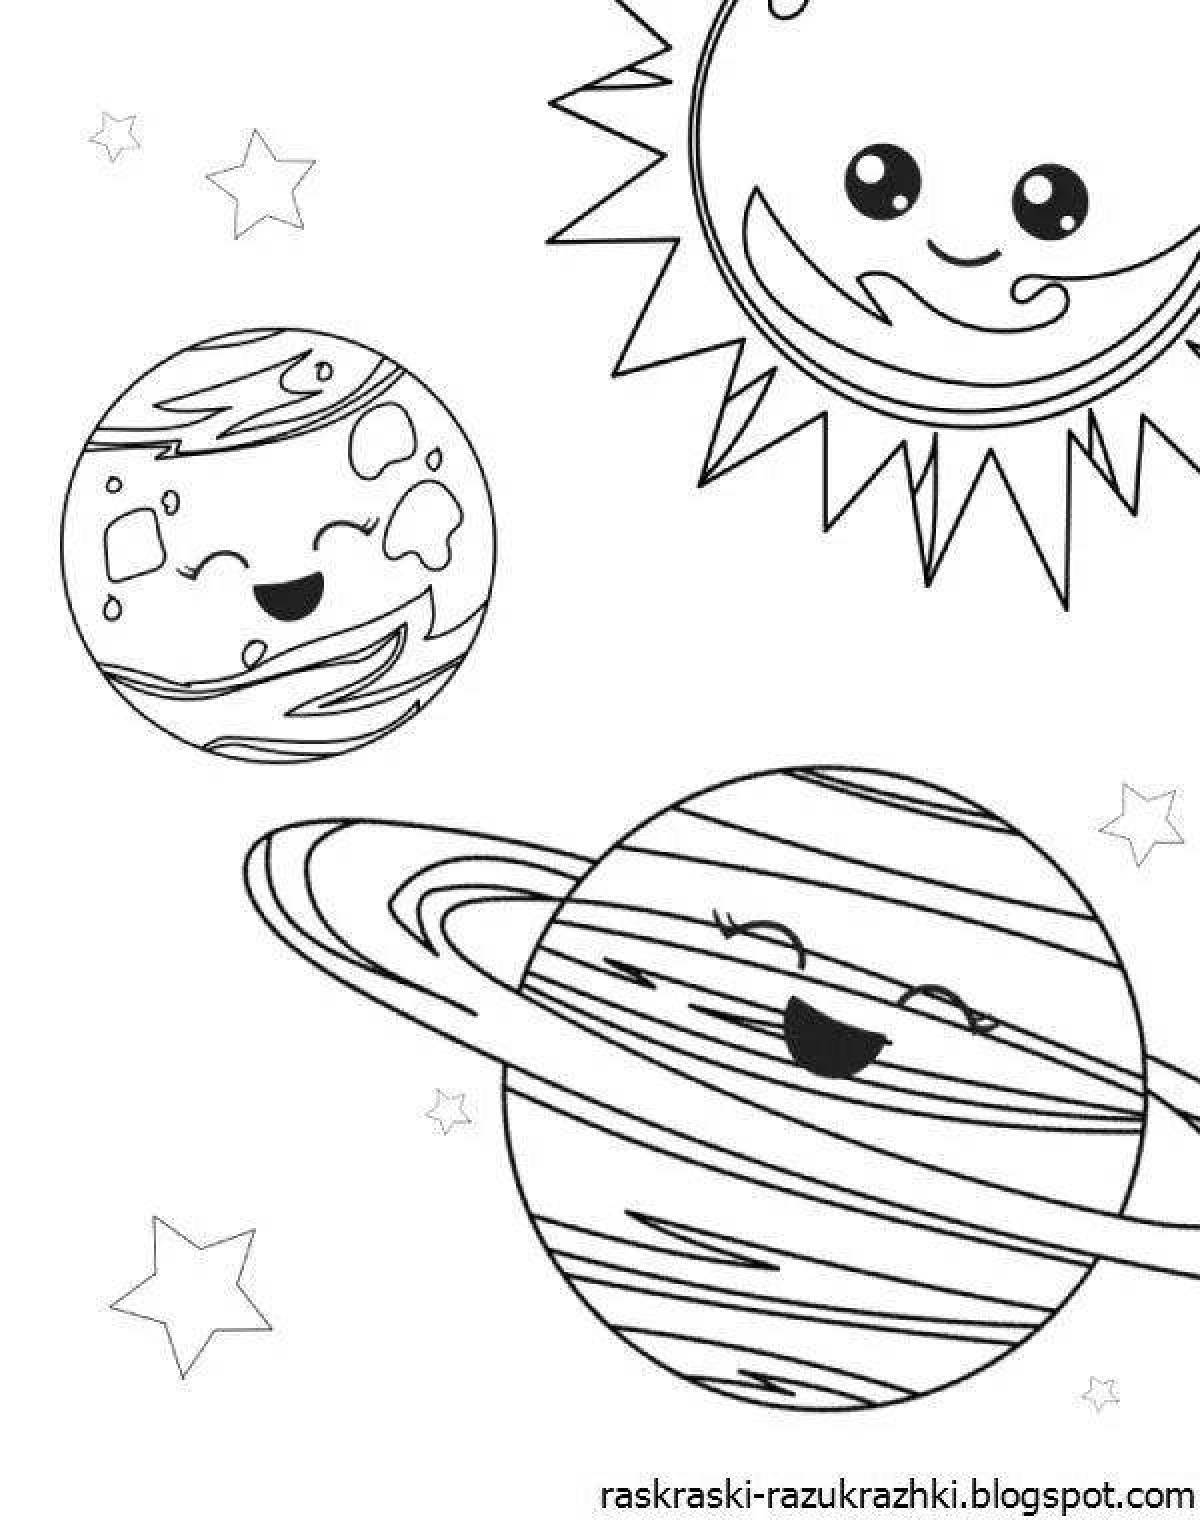 Fun coloring book space and planets for kids